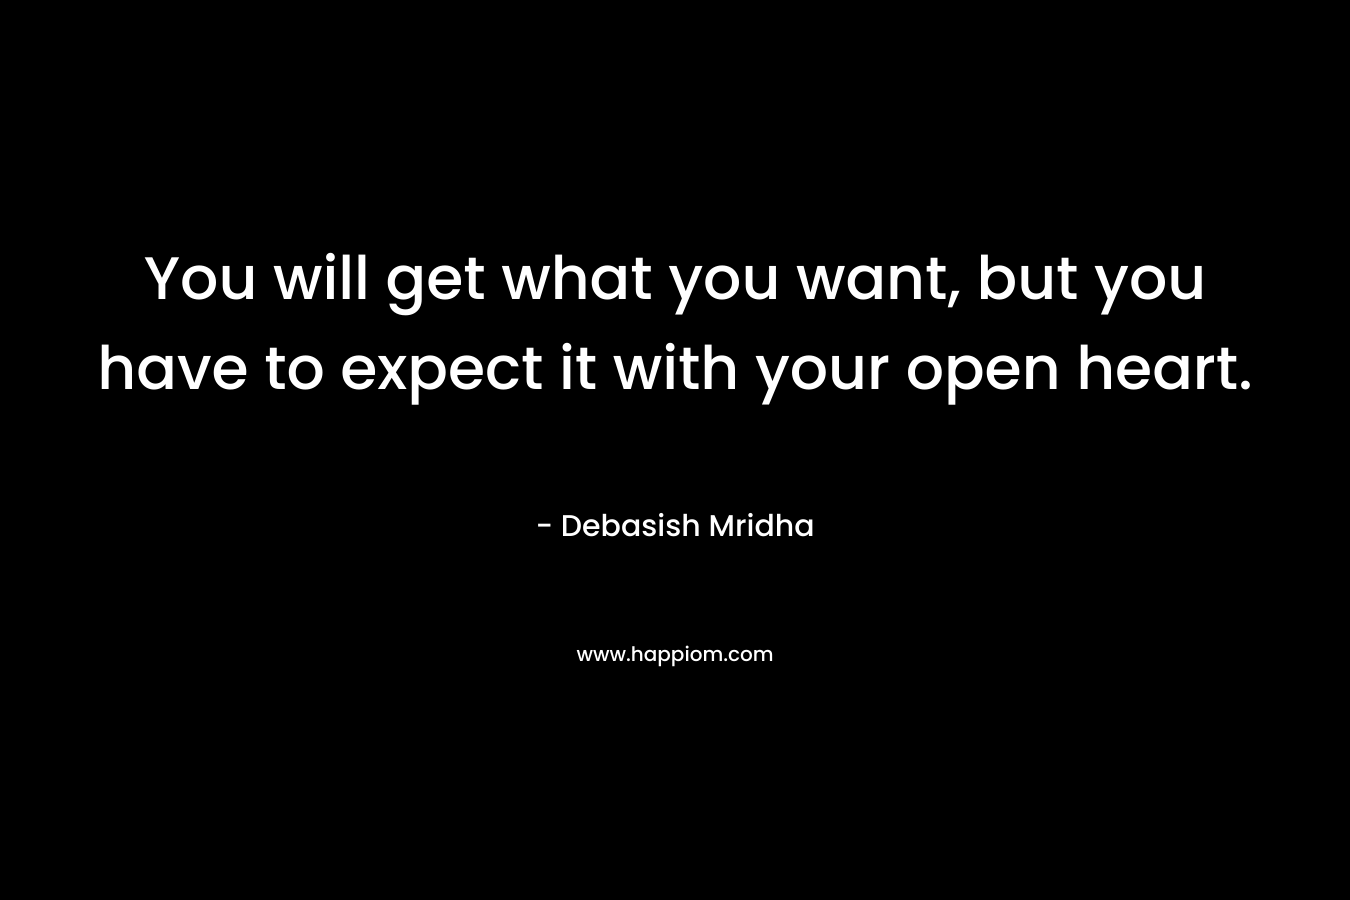 You will get what you want, but you have to expect it with your open heart.